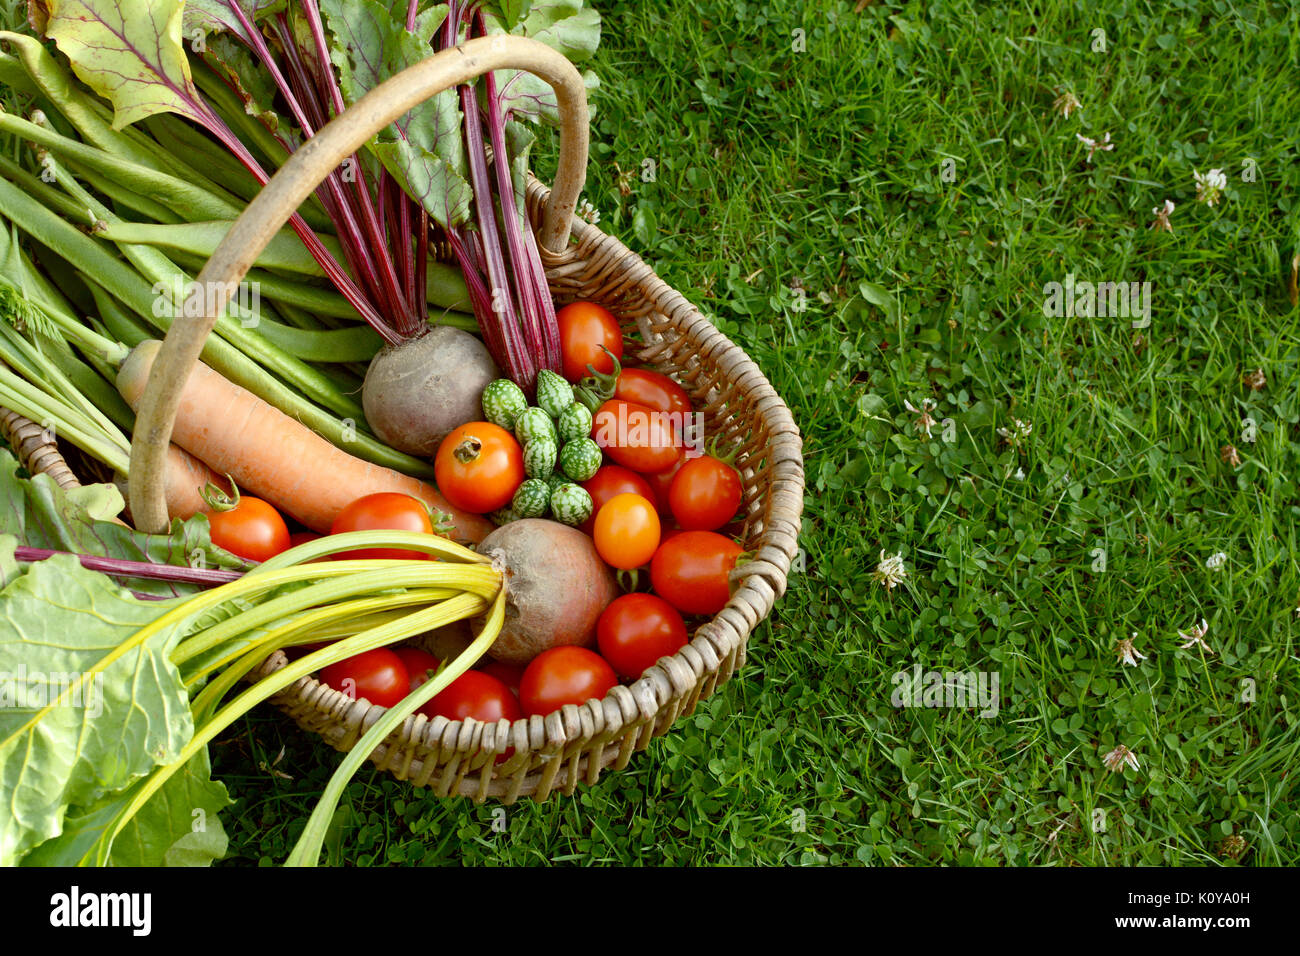 Rustic woven basket filled with fresh vegetables from an allotment - carrots, beets, tomatoes and cucamelons - with copy space on grass Stock Photo